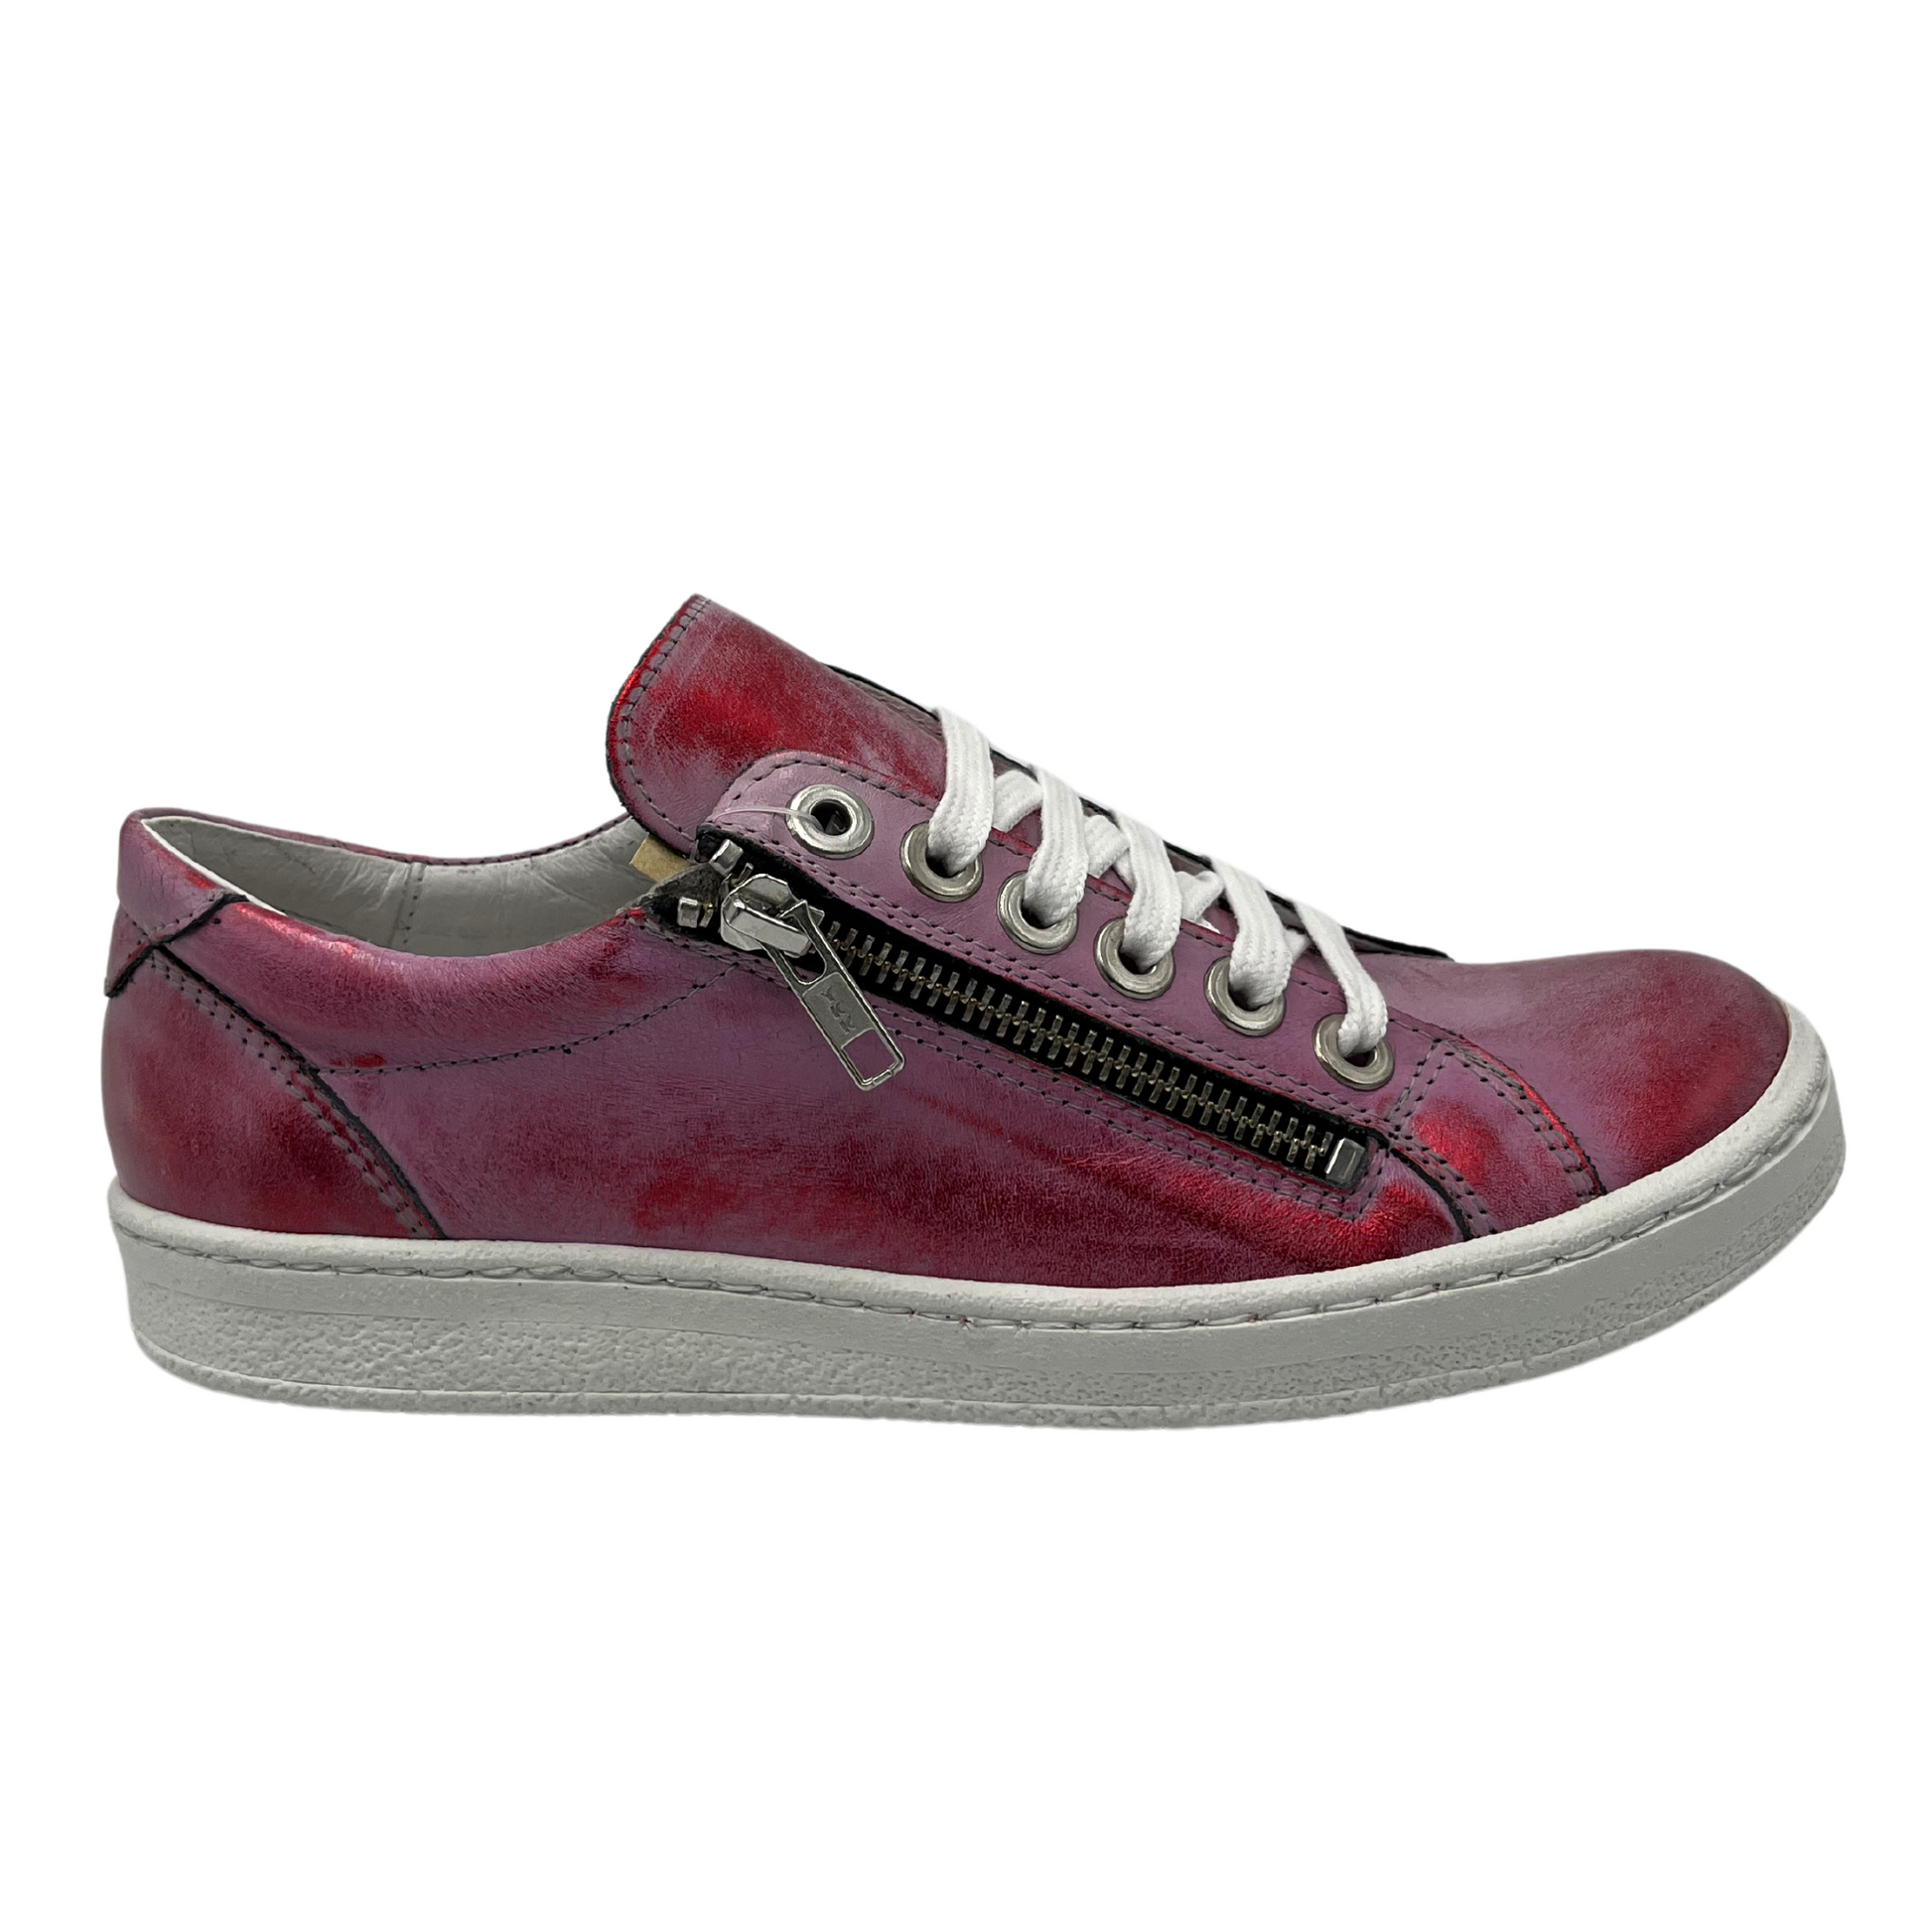 Right facing view of metallic red leather sneaker with side zipper closure and white laces